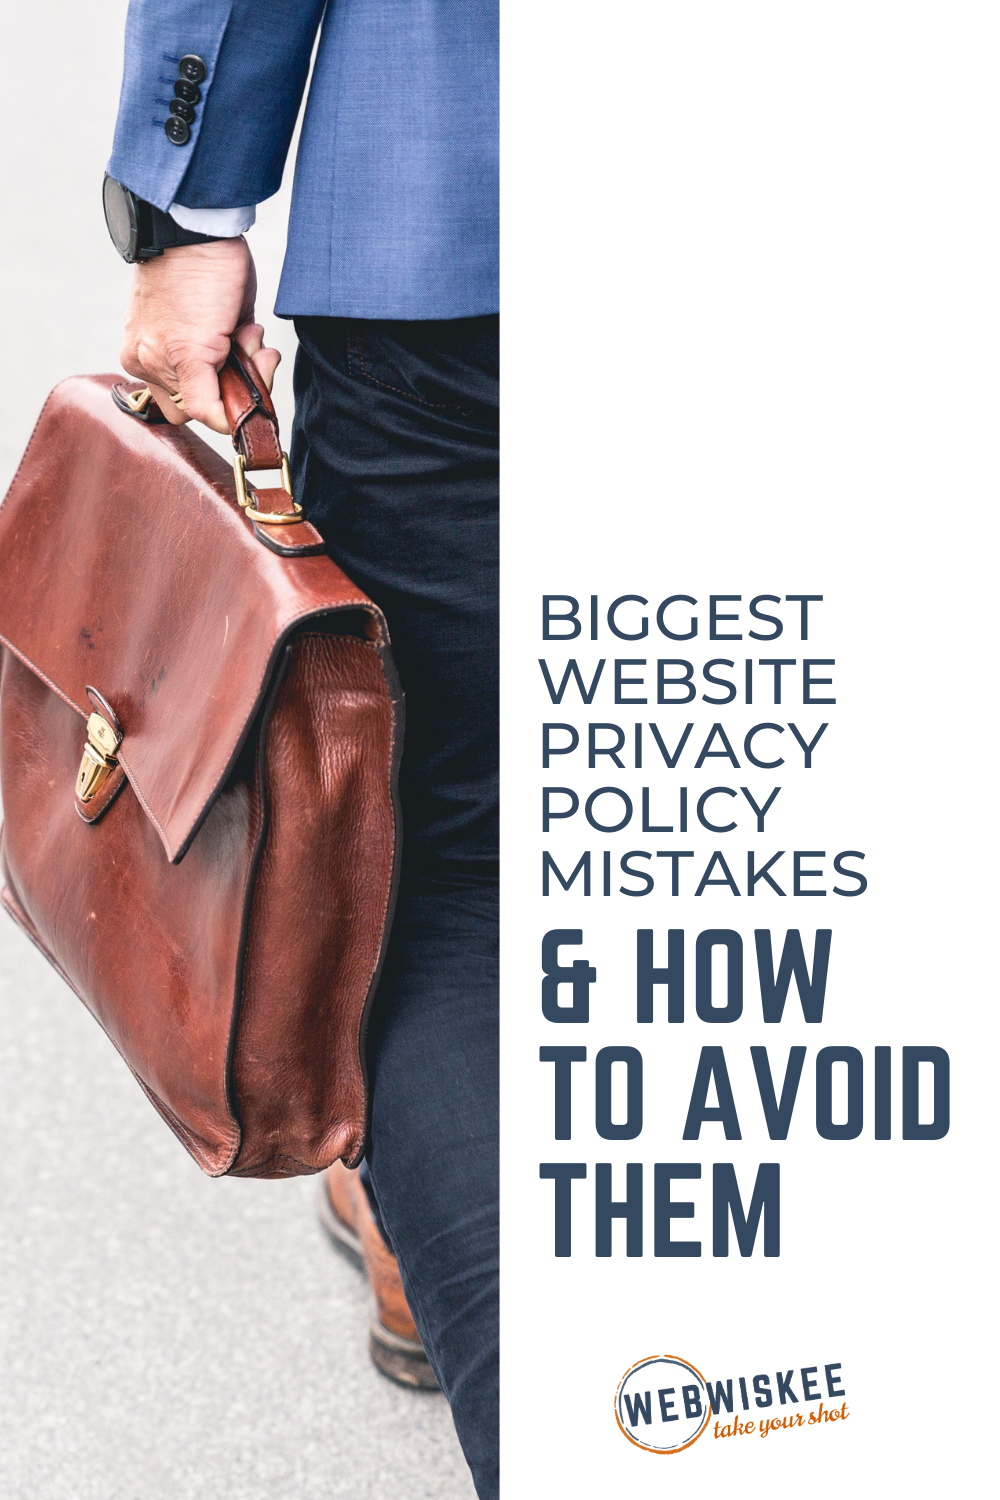 Biggest Website privacy policy mistakes & how to avoid them by WebWiskee